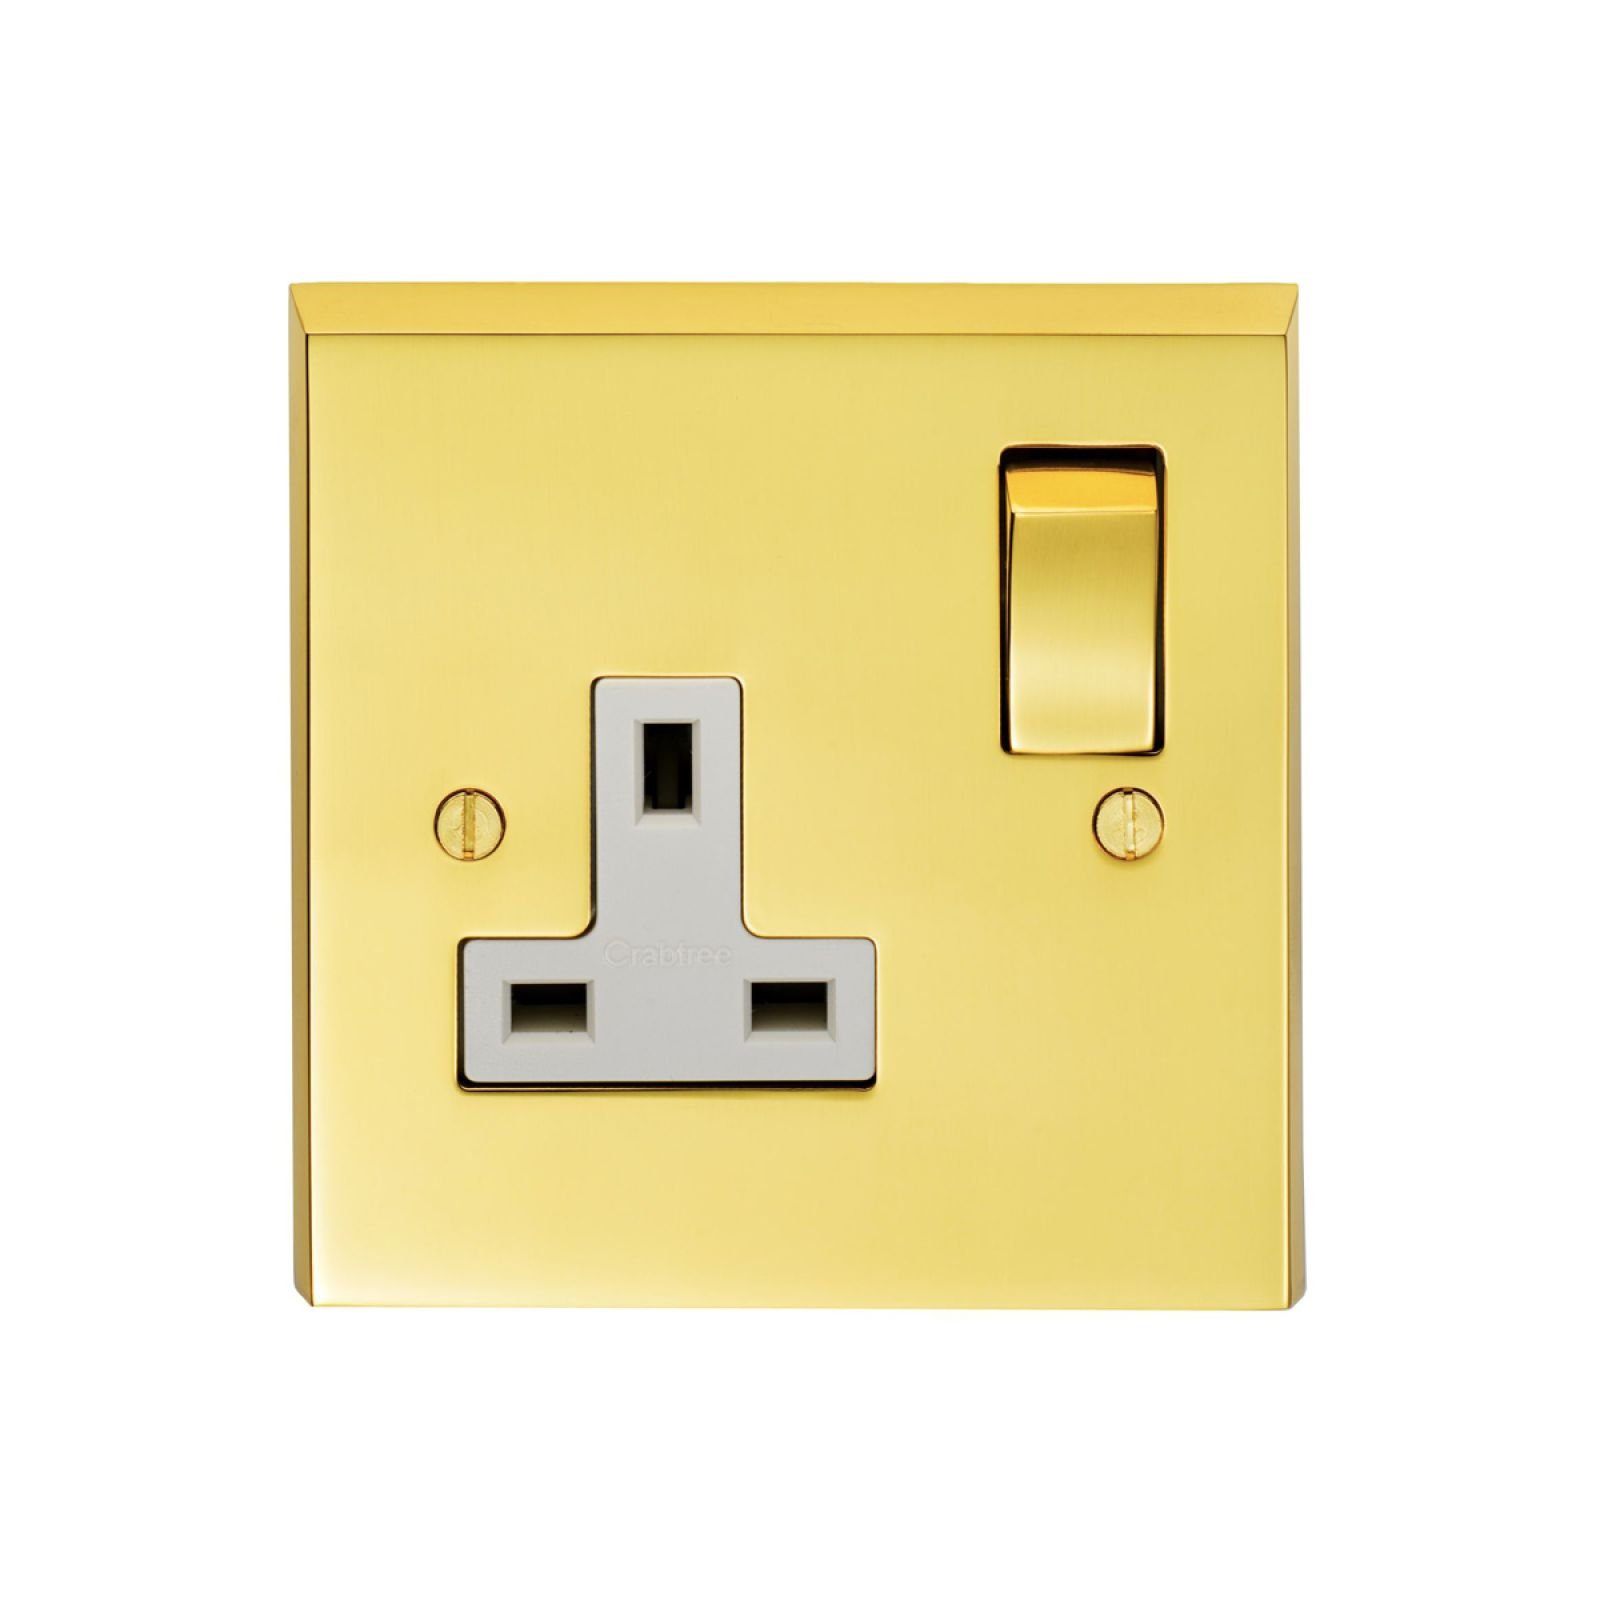 1 Gang 13amp DP Switched Socket - Brass, Chrome or Satin chrome